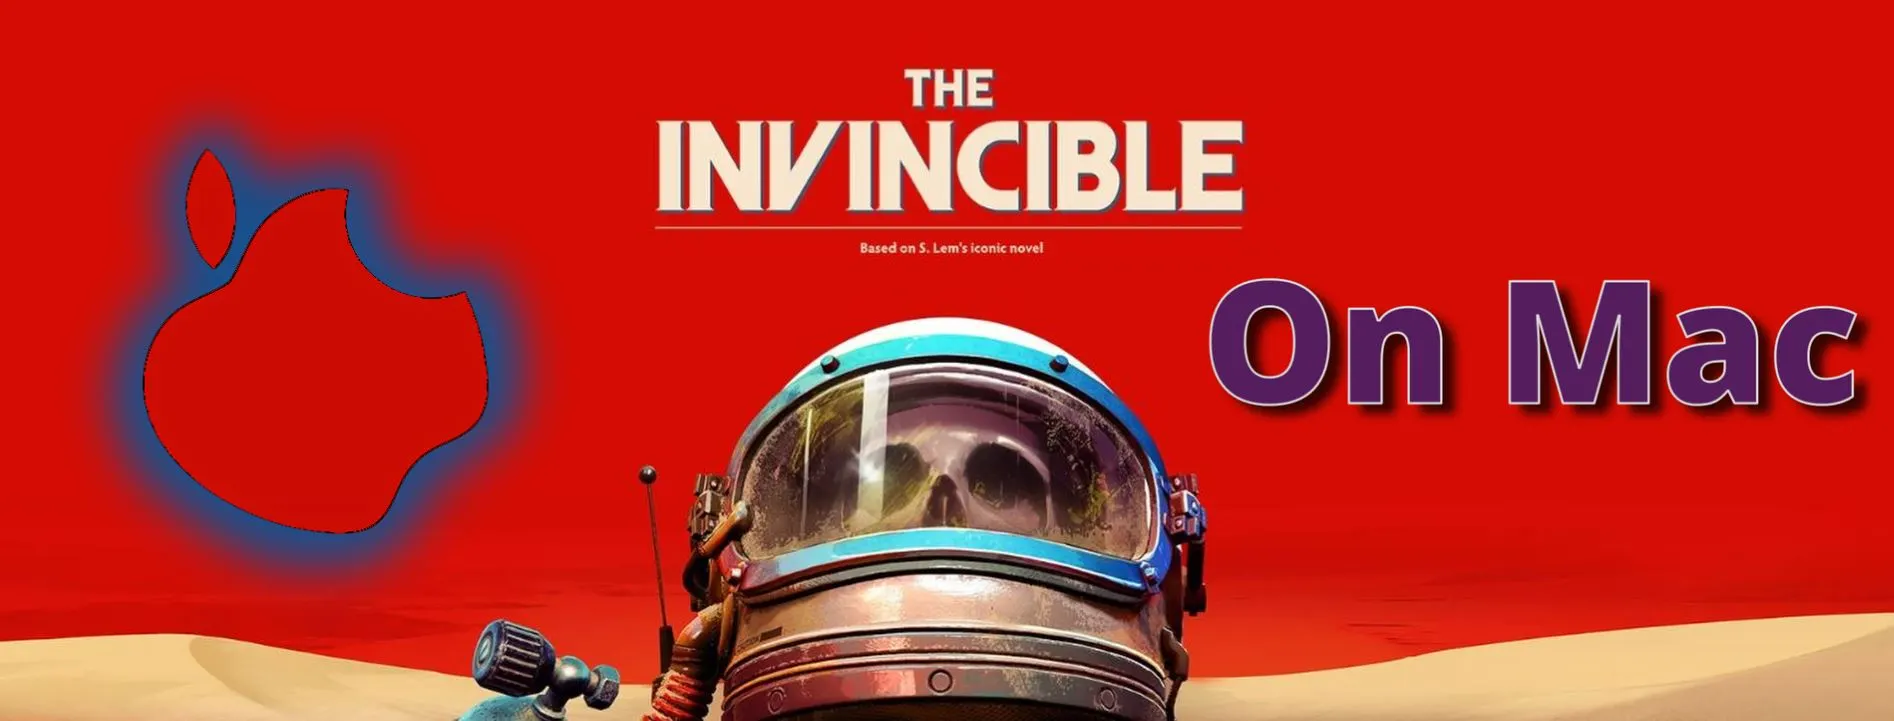 the invincible on mac